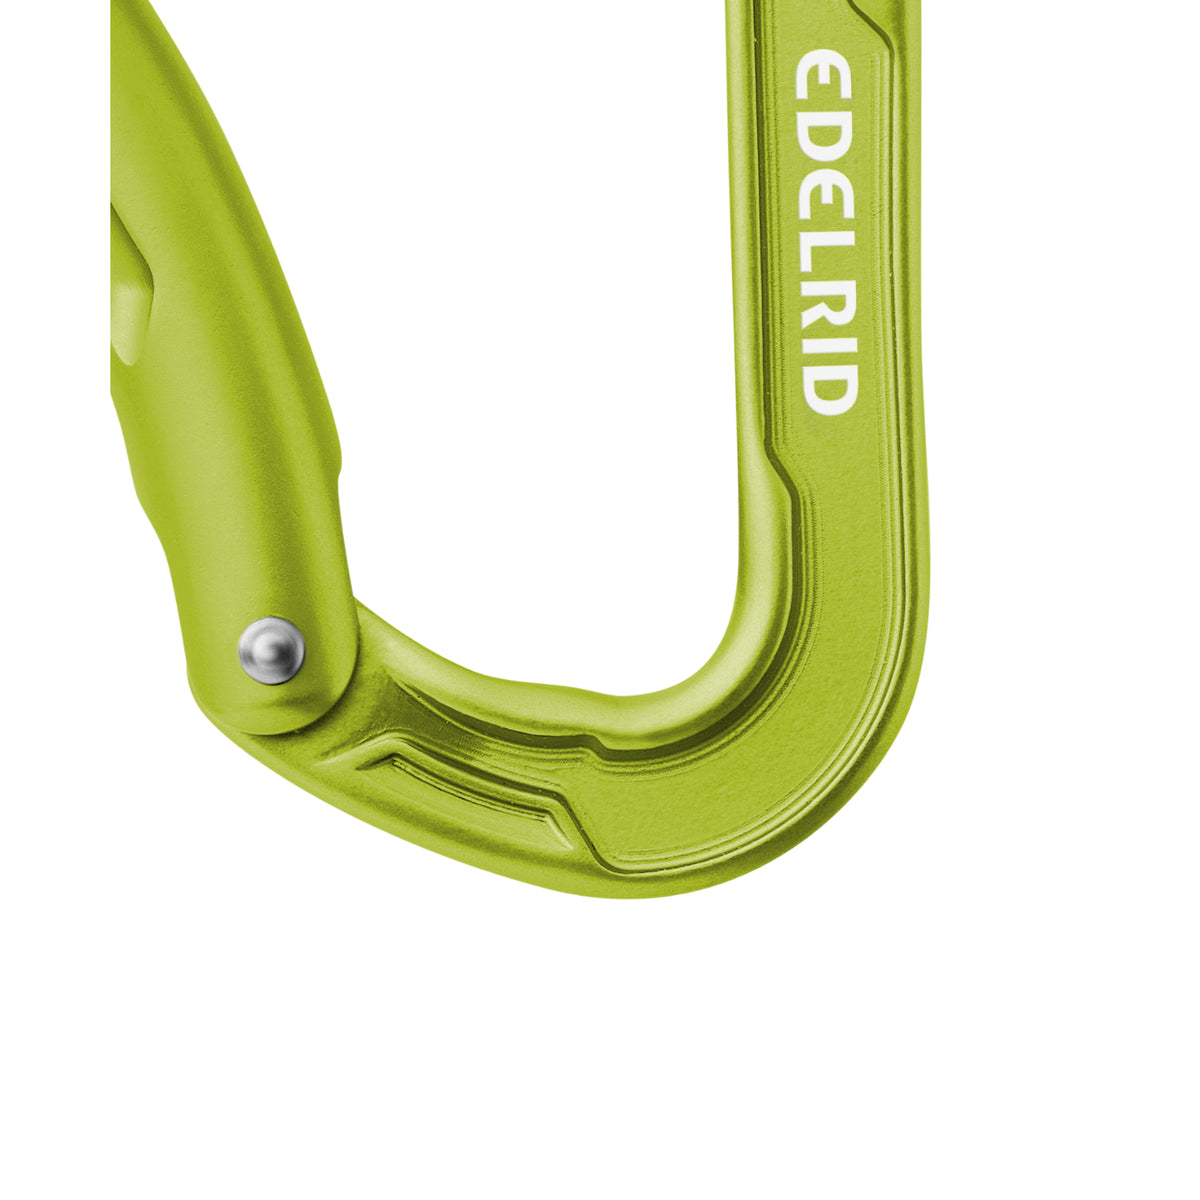 Edelrid Mission Sixpack - Solid Bent Gate